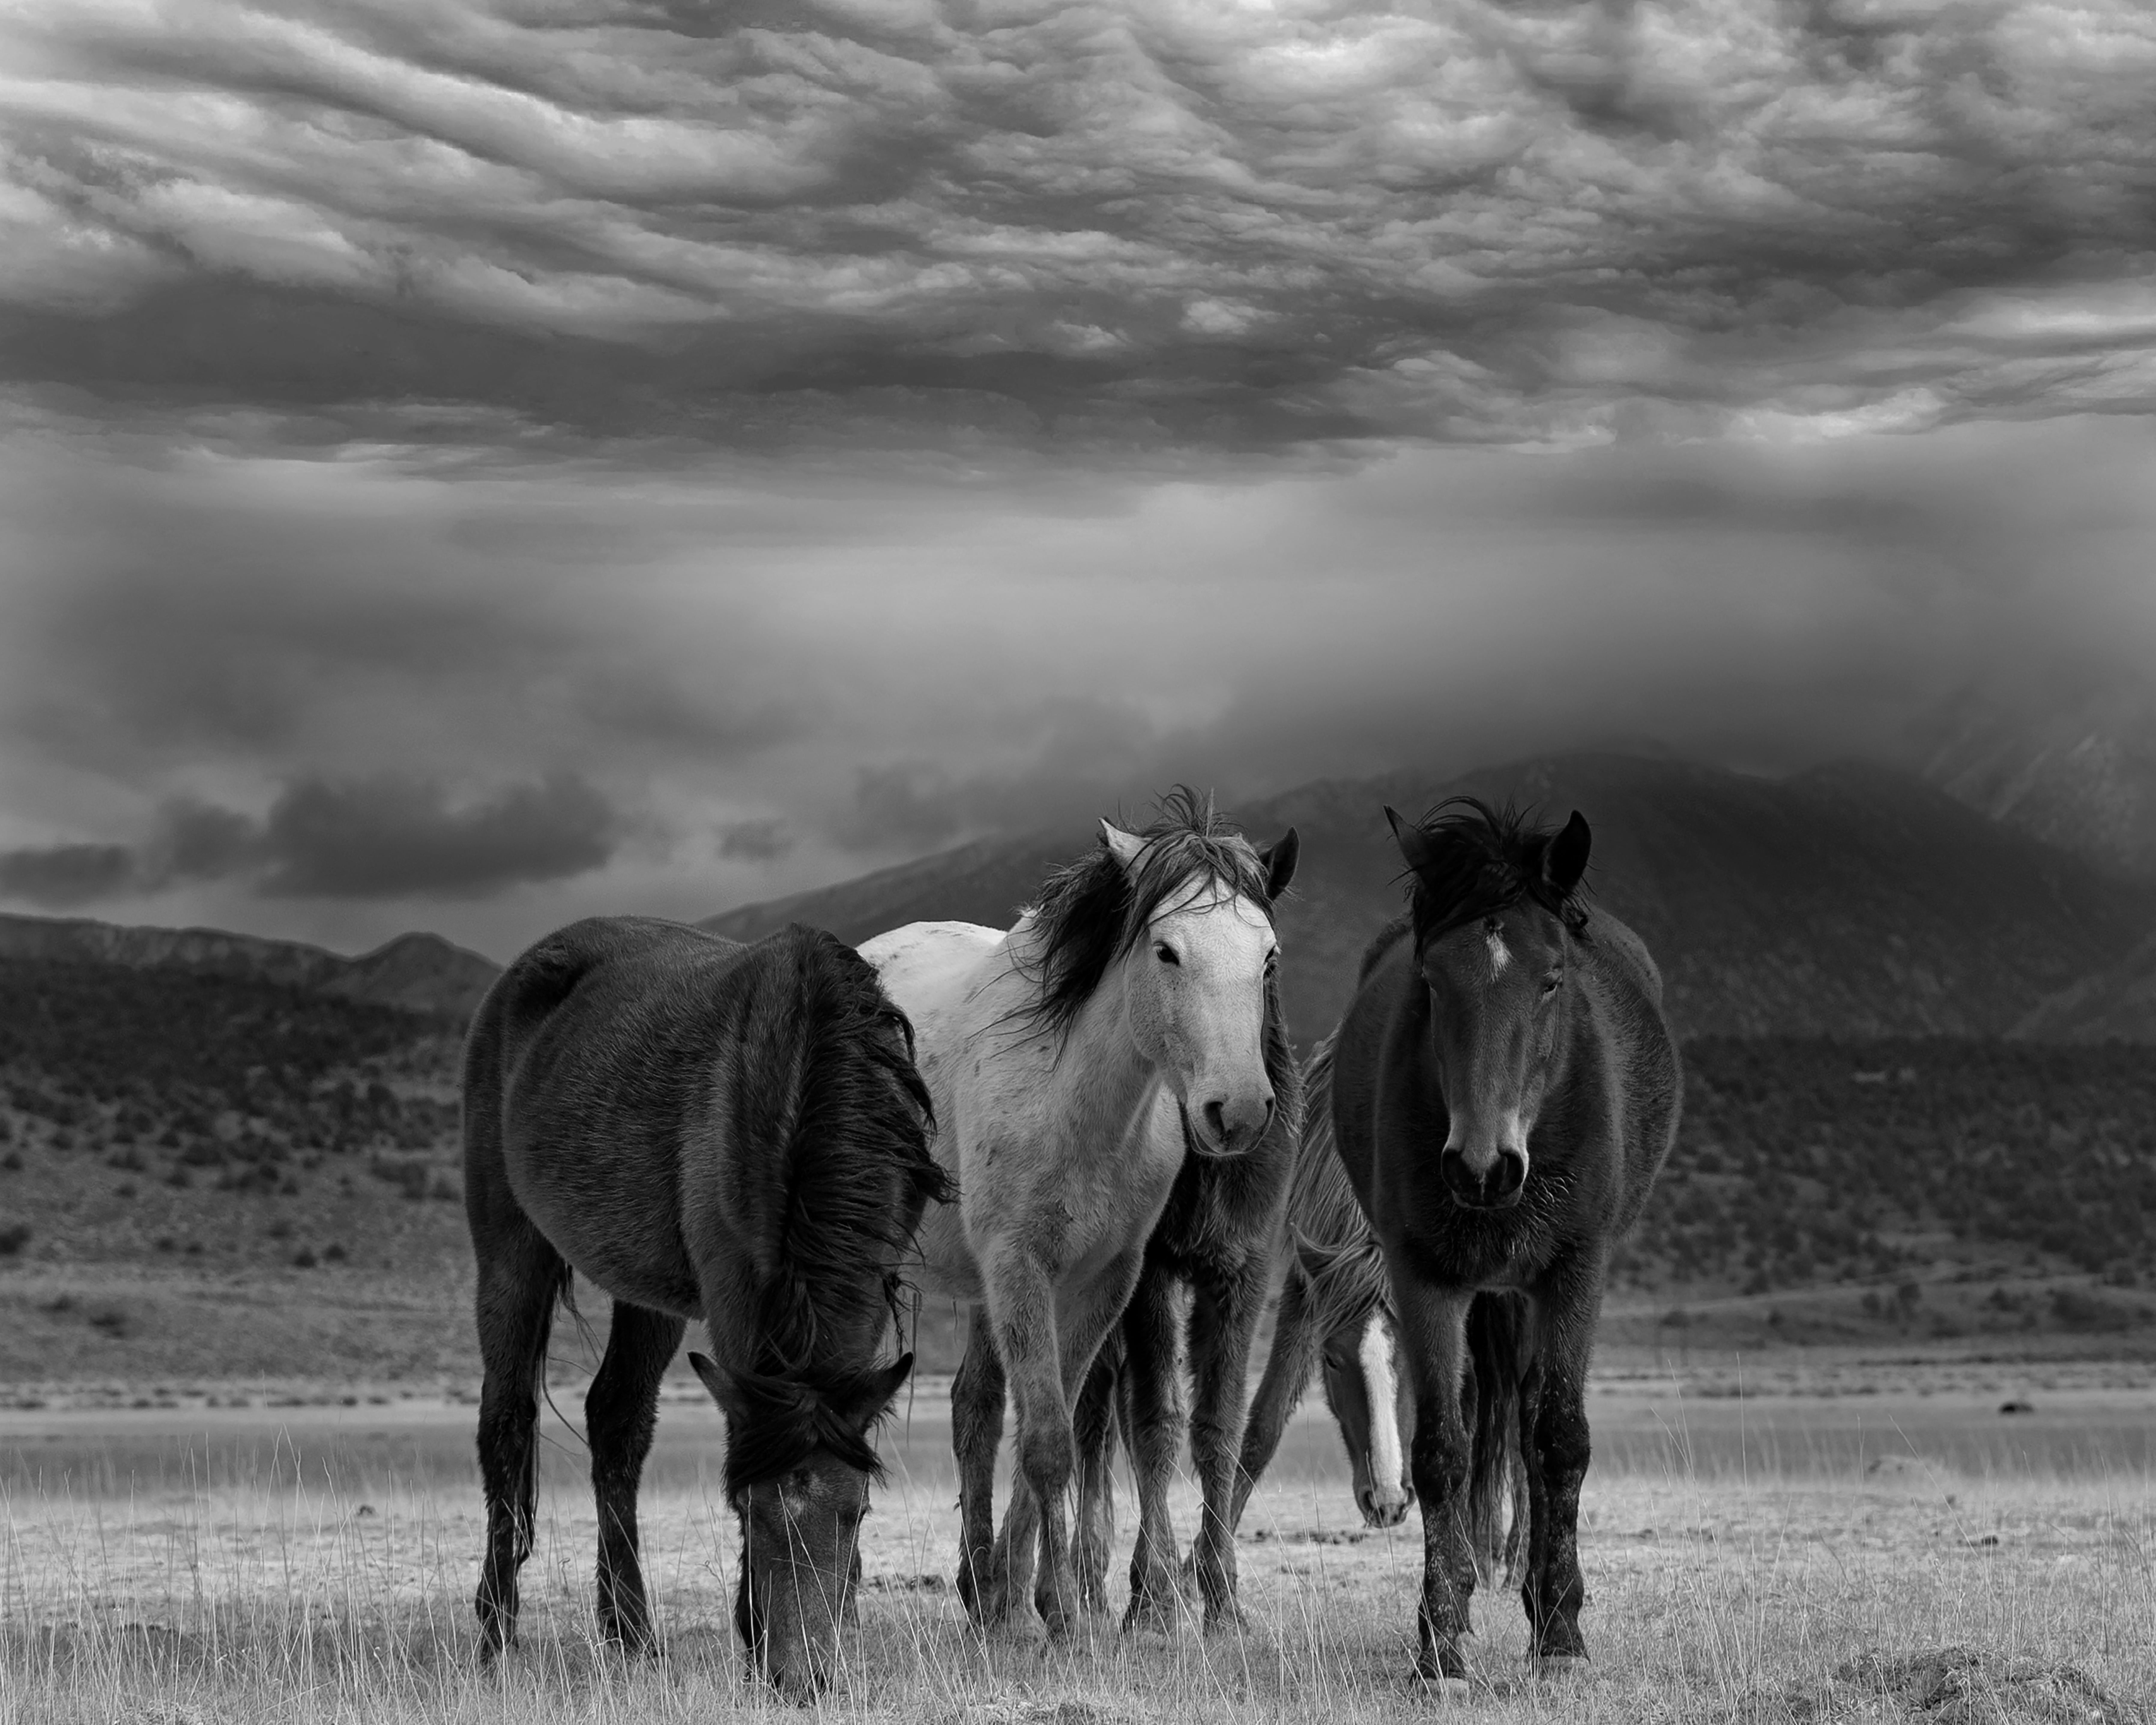 Animal Print Shane Russeck - "Dust and Horses" 30x40 Photographie en noir et blanc Chevaux sauvages Mustangs Whiting